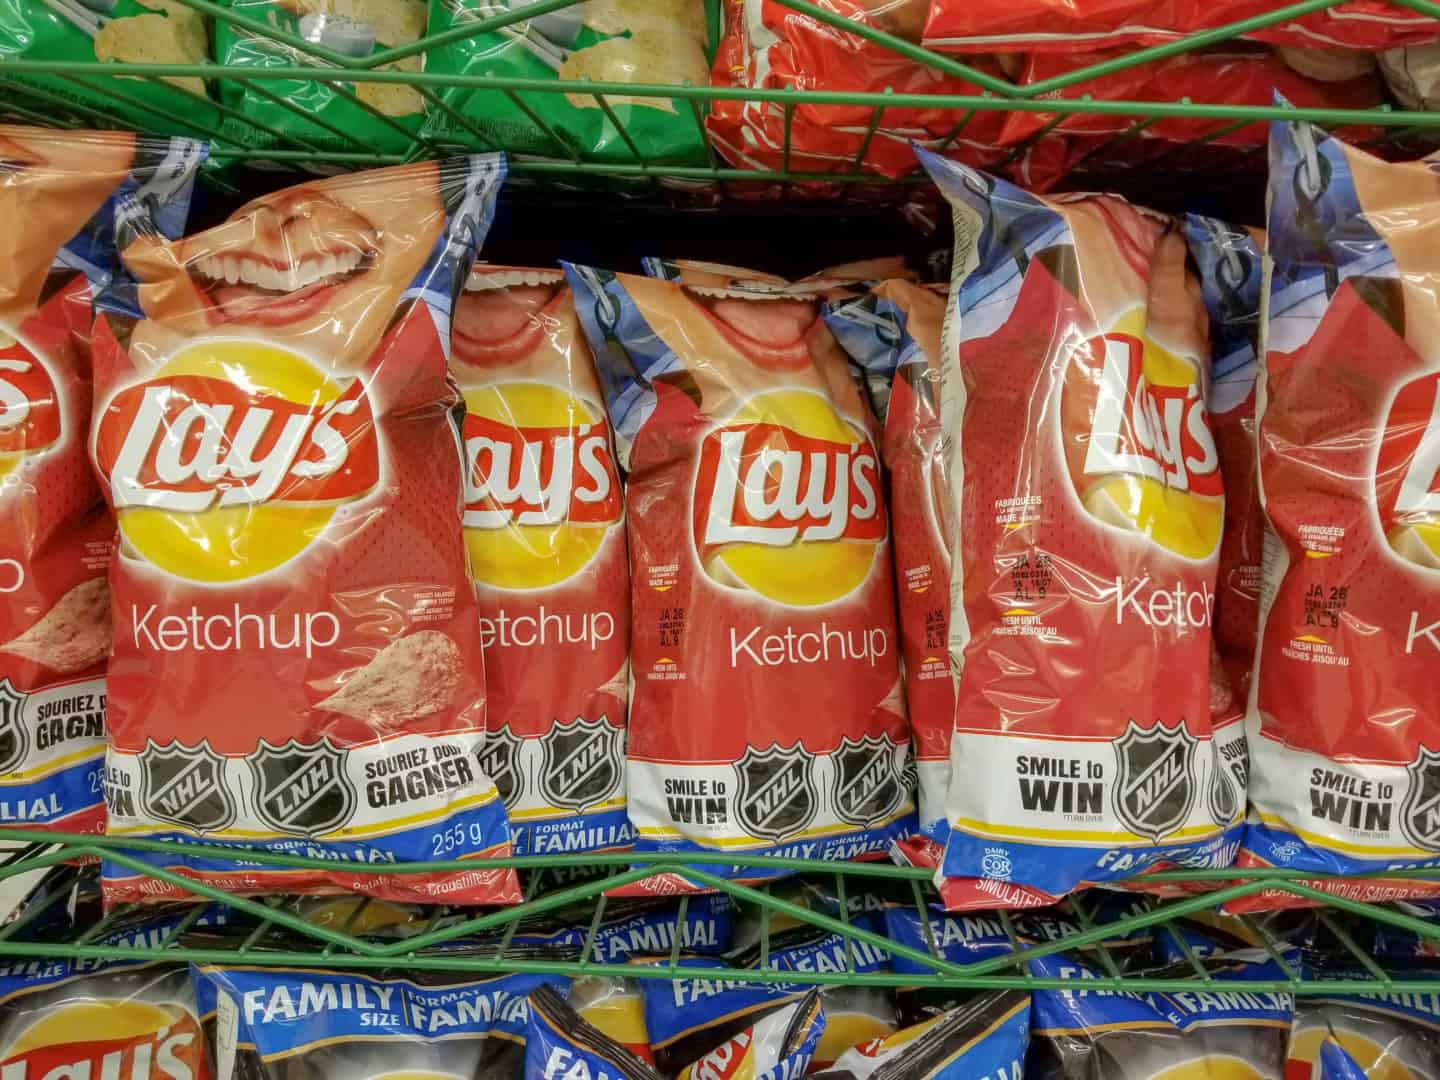 Ketchup chips is one of the traditional Canadian foods you have to try